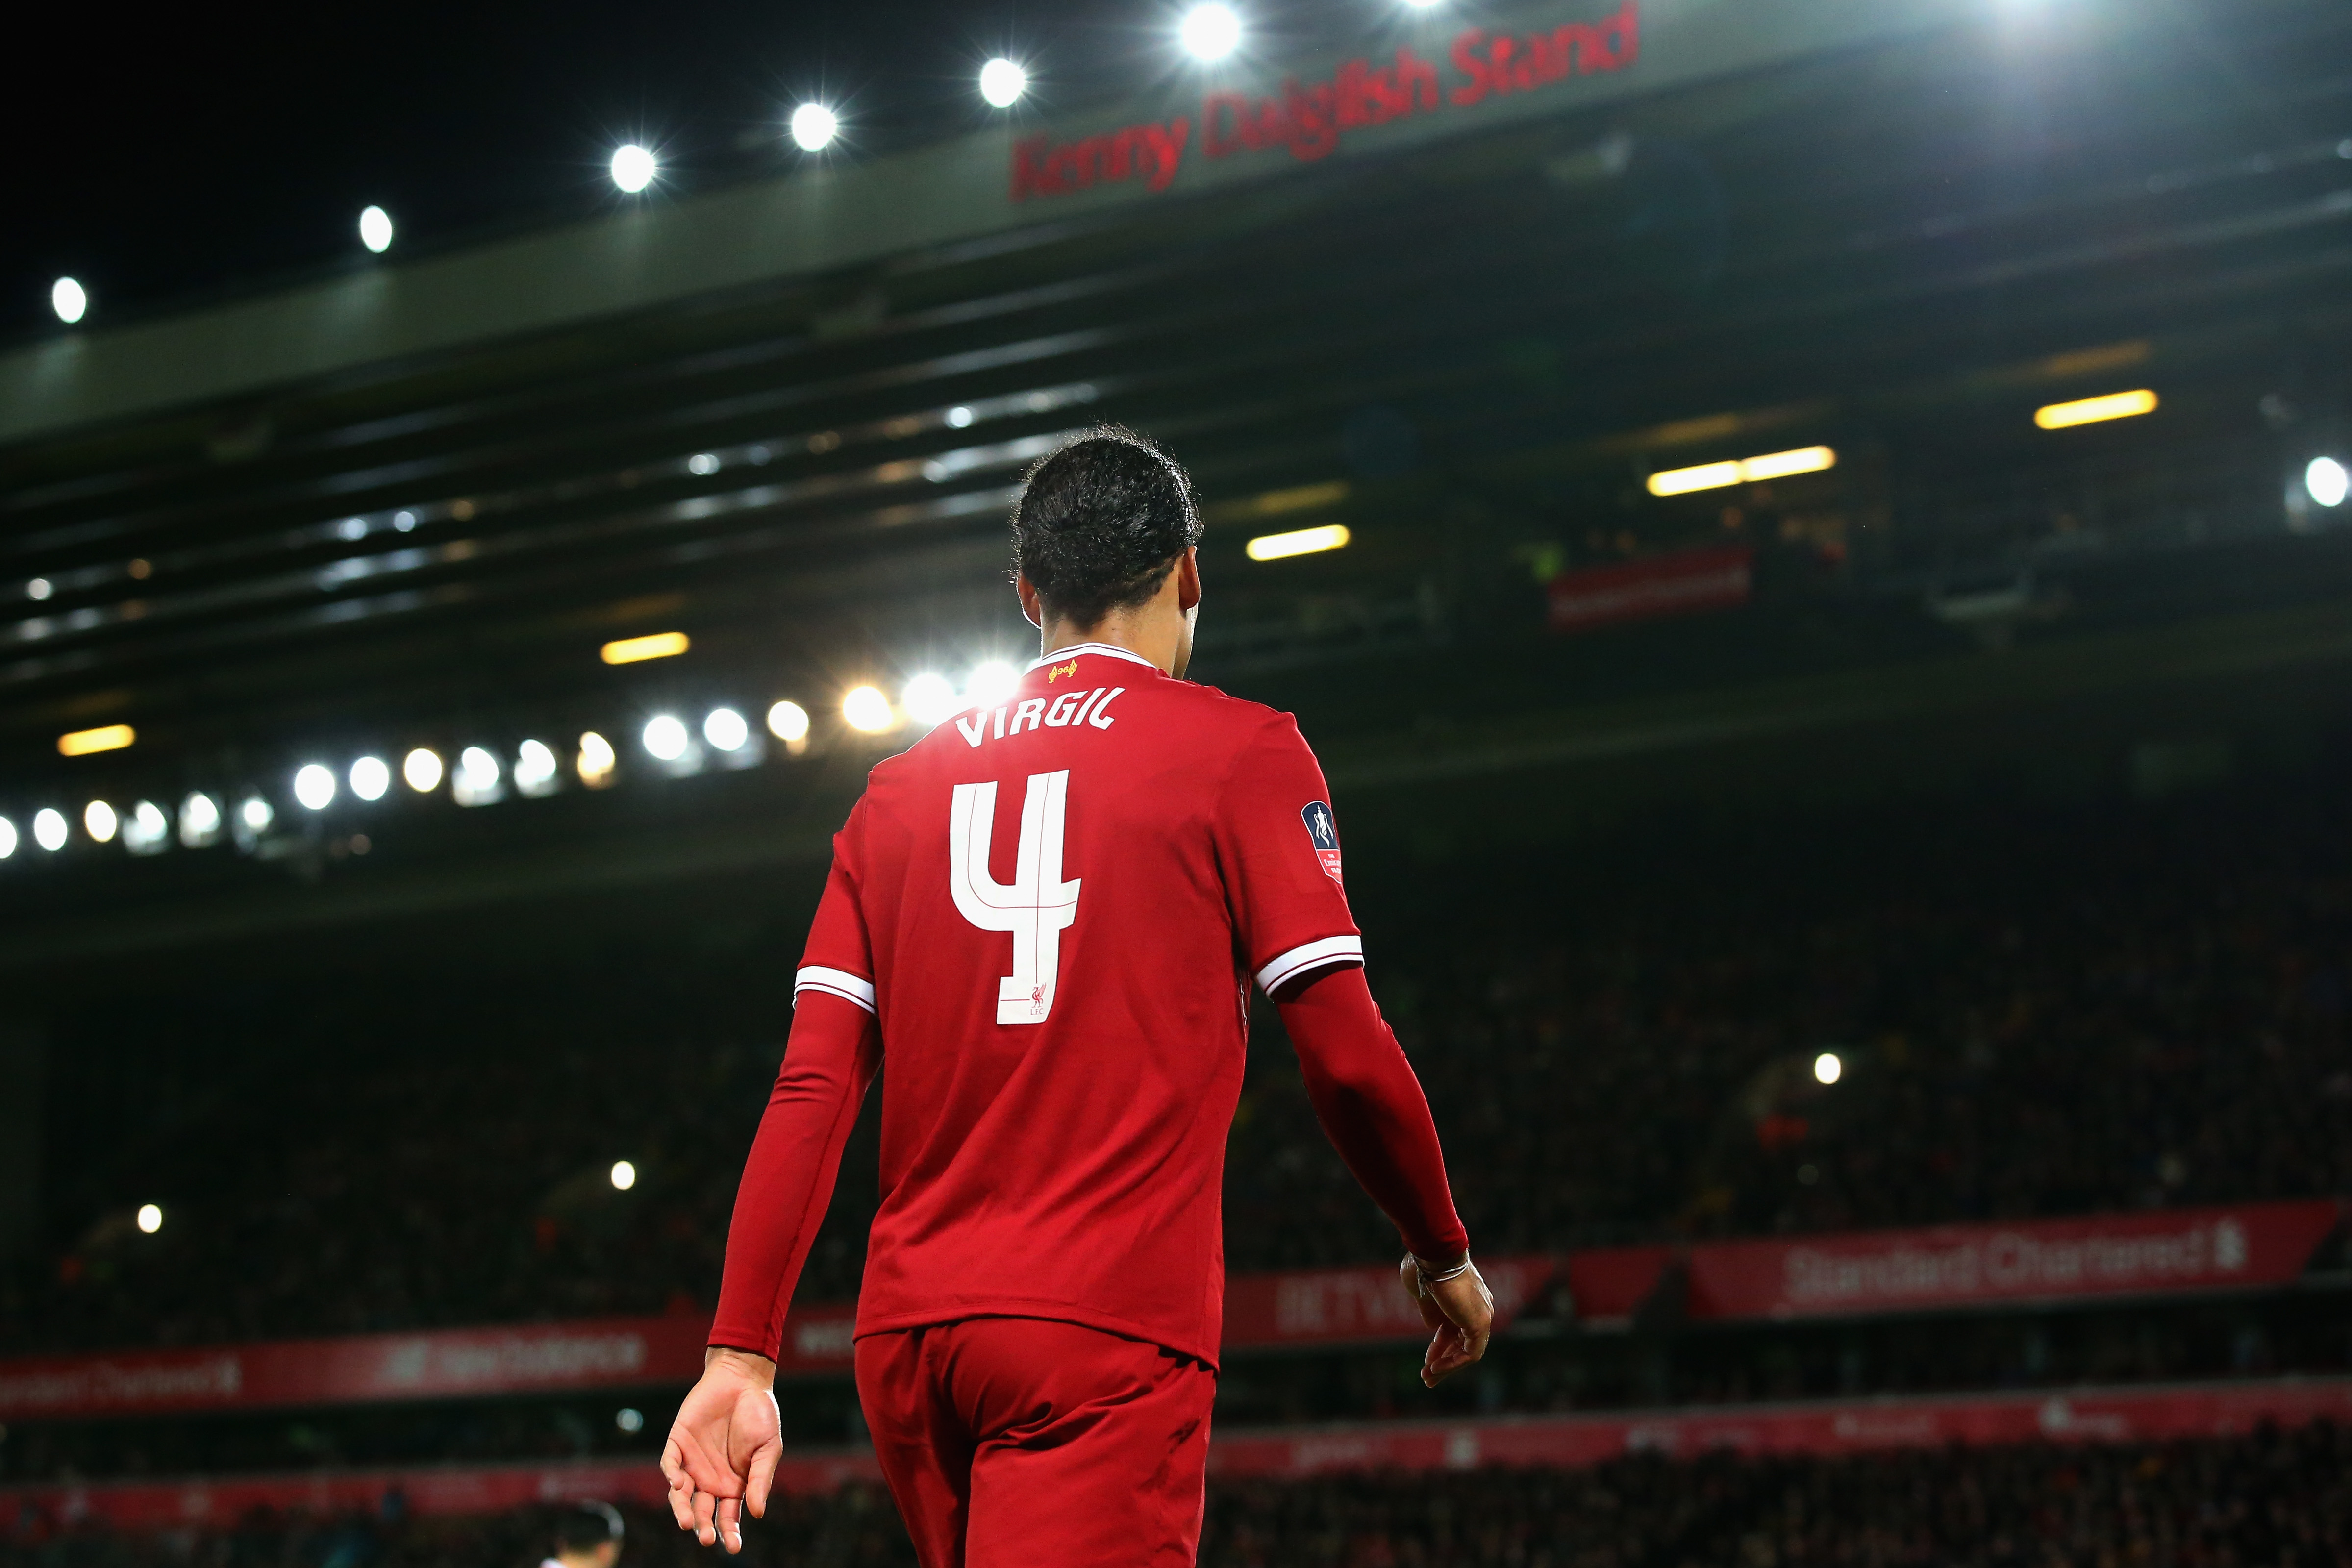 LIVERPOOL, ENGLAND - JANUARY 27:  Virgil van Dijk of Liverpool is pictured during The Emirates FA Cup Fourth Round match between Liverpool and West Bromwich Albion at Anfield on January 27, 2018 in Liverpool, England.  (Photo by Alex Livesey/Getty Images)